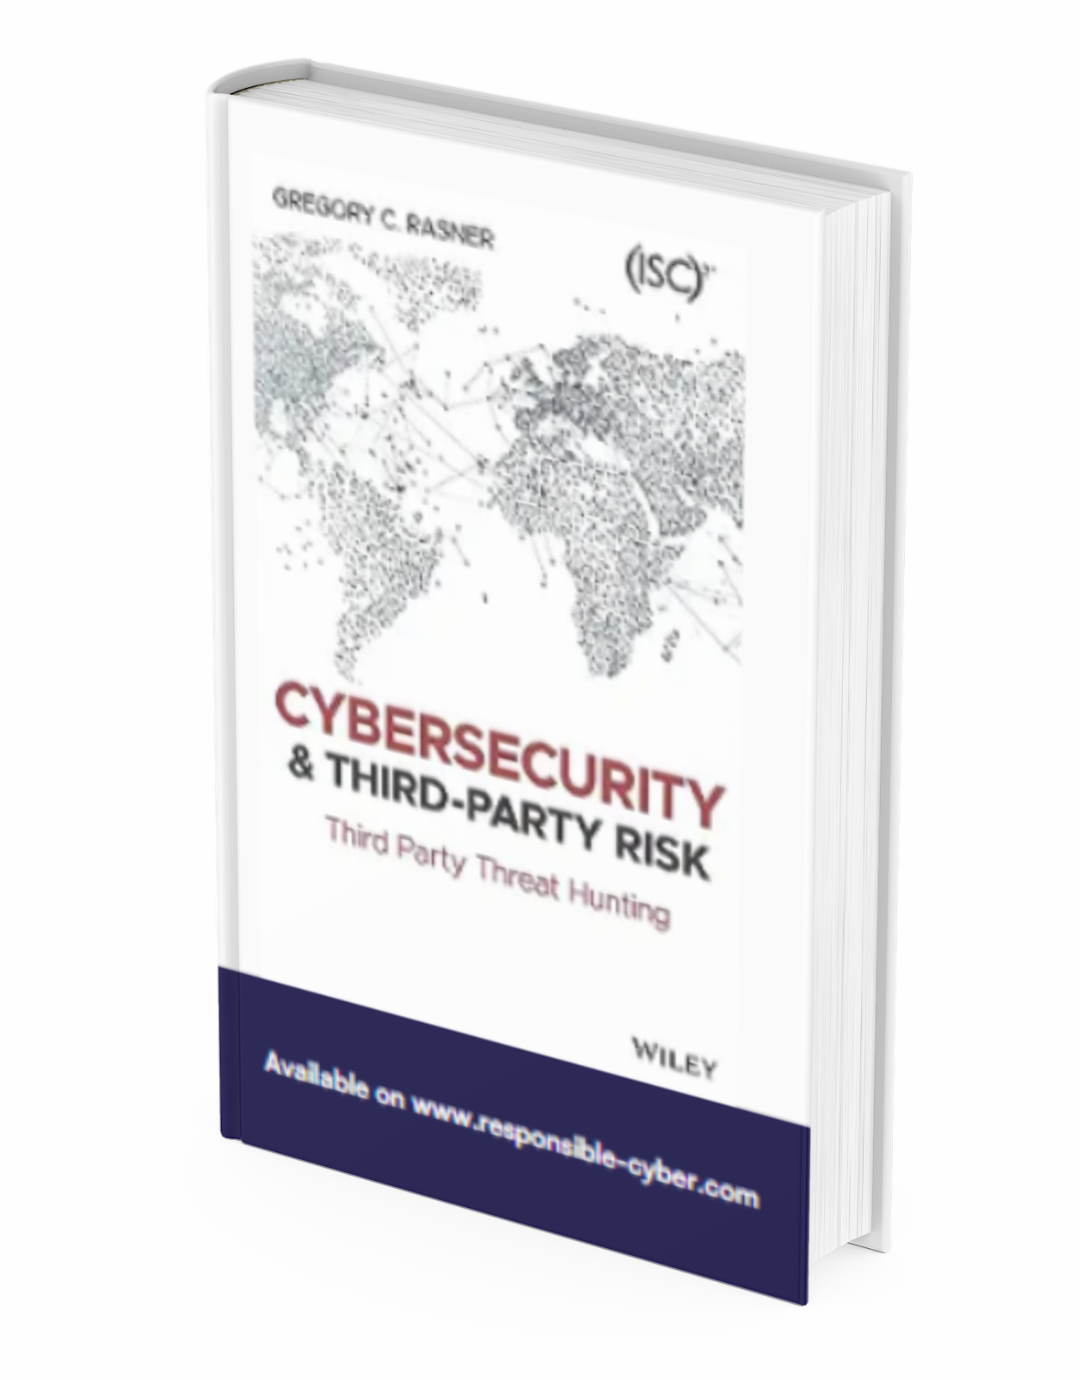 Cybersecurity and Third-Party Risk: Third Party Threat Hunting 1st Edition